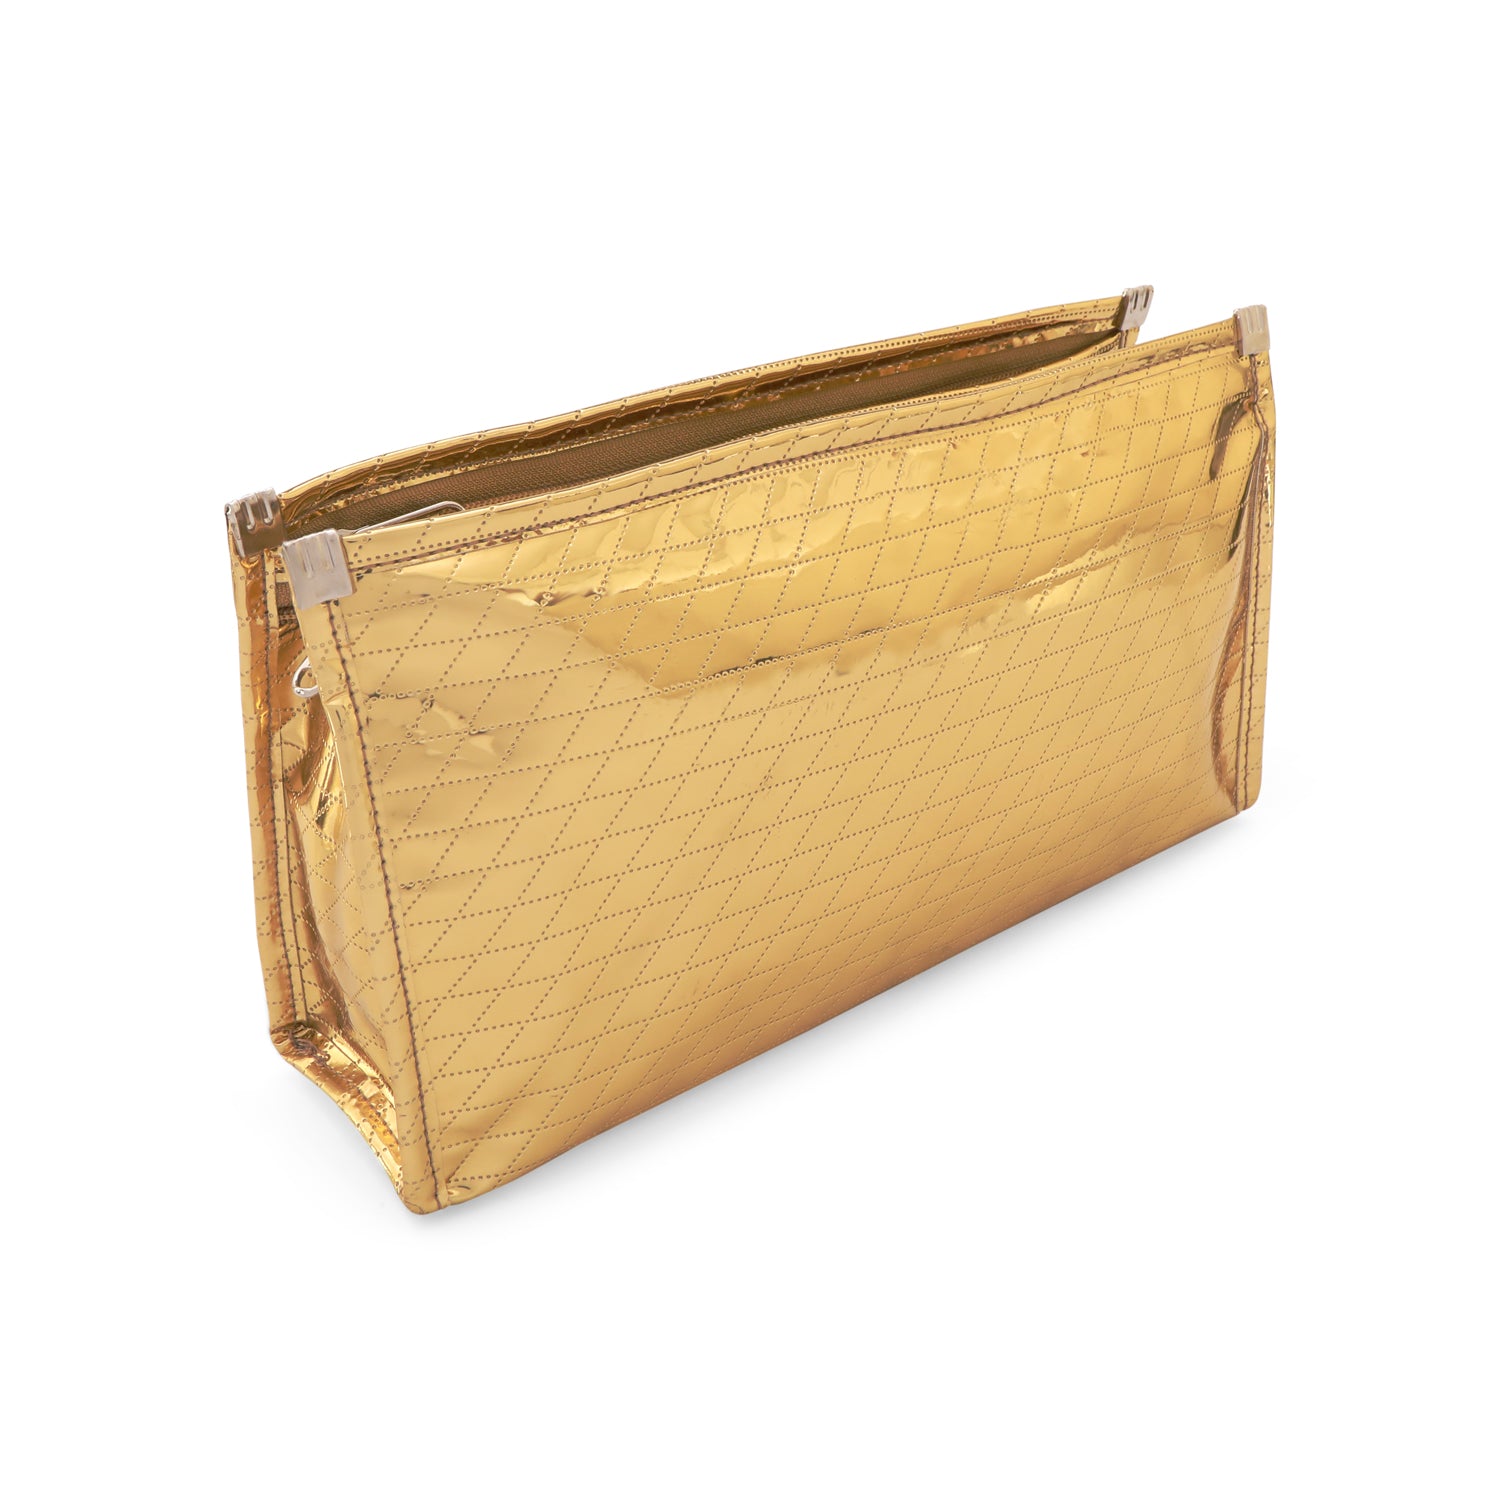 Travel Pouch - Gold 3 Pockets Pouch - Large (12")